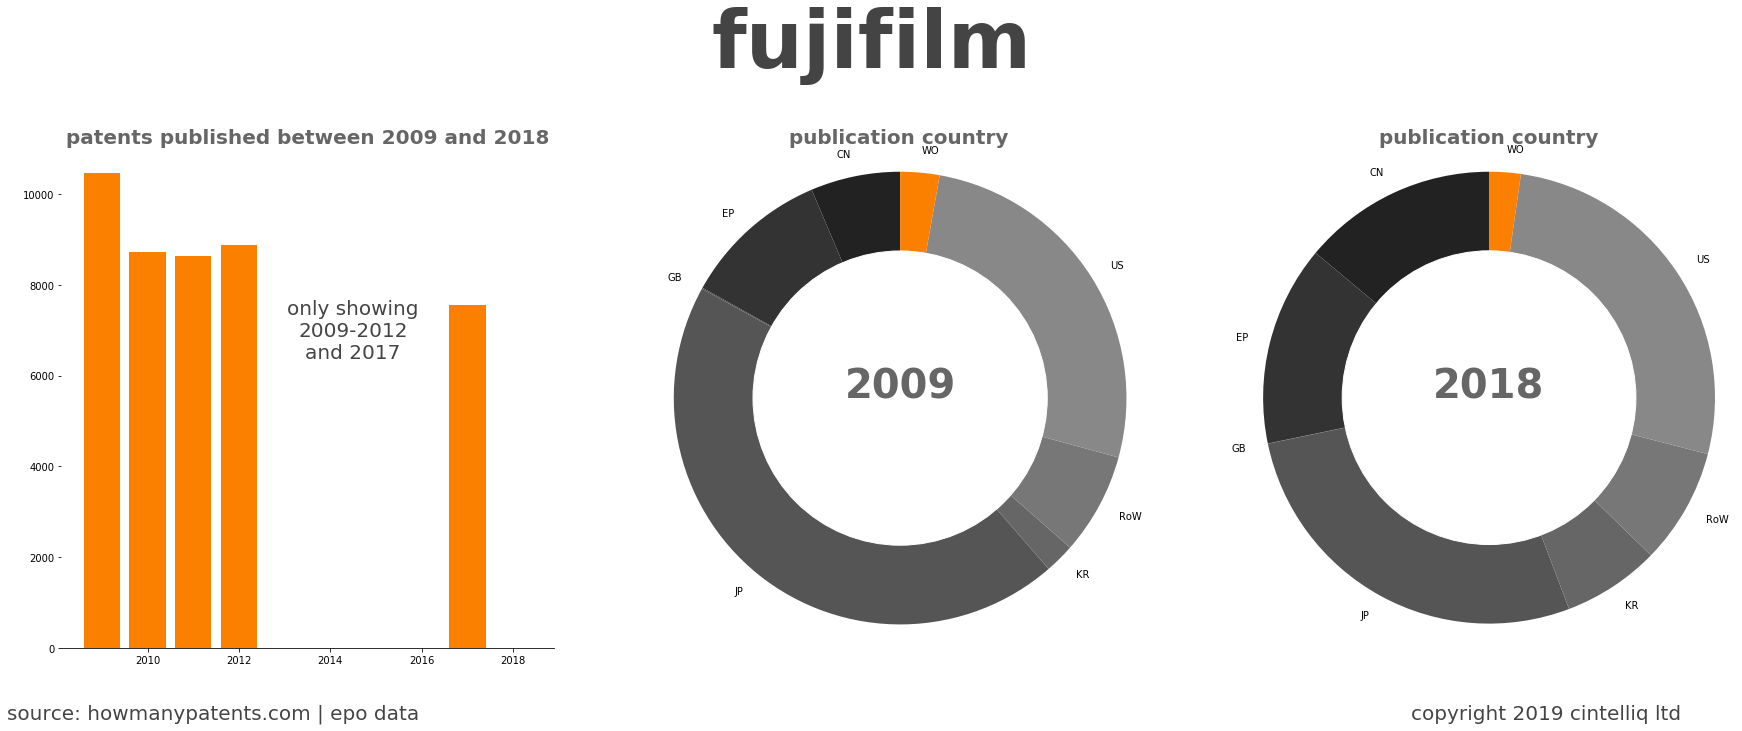 summary of patents for Fujifilm